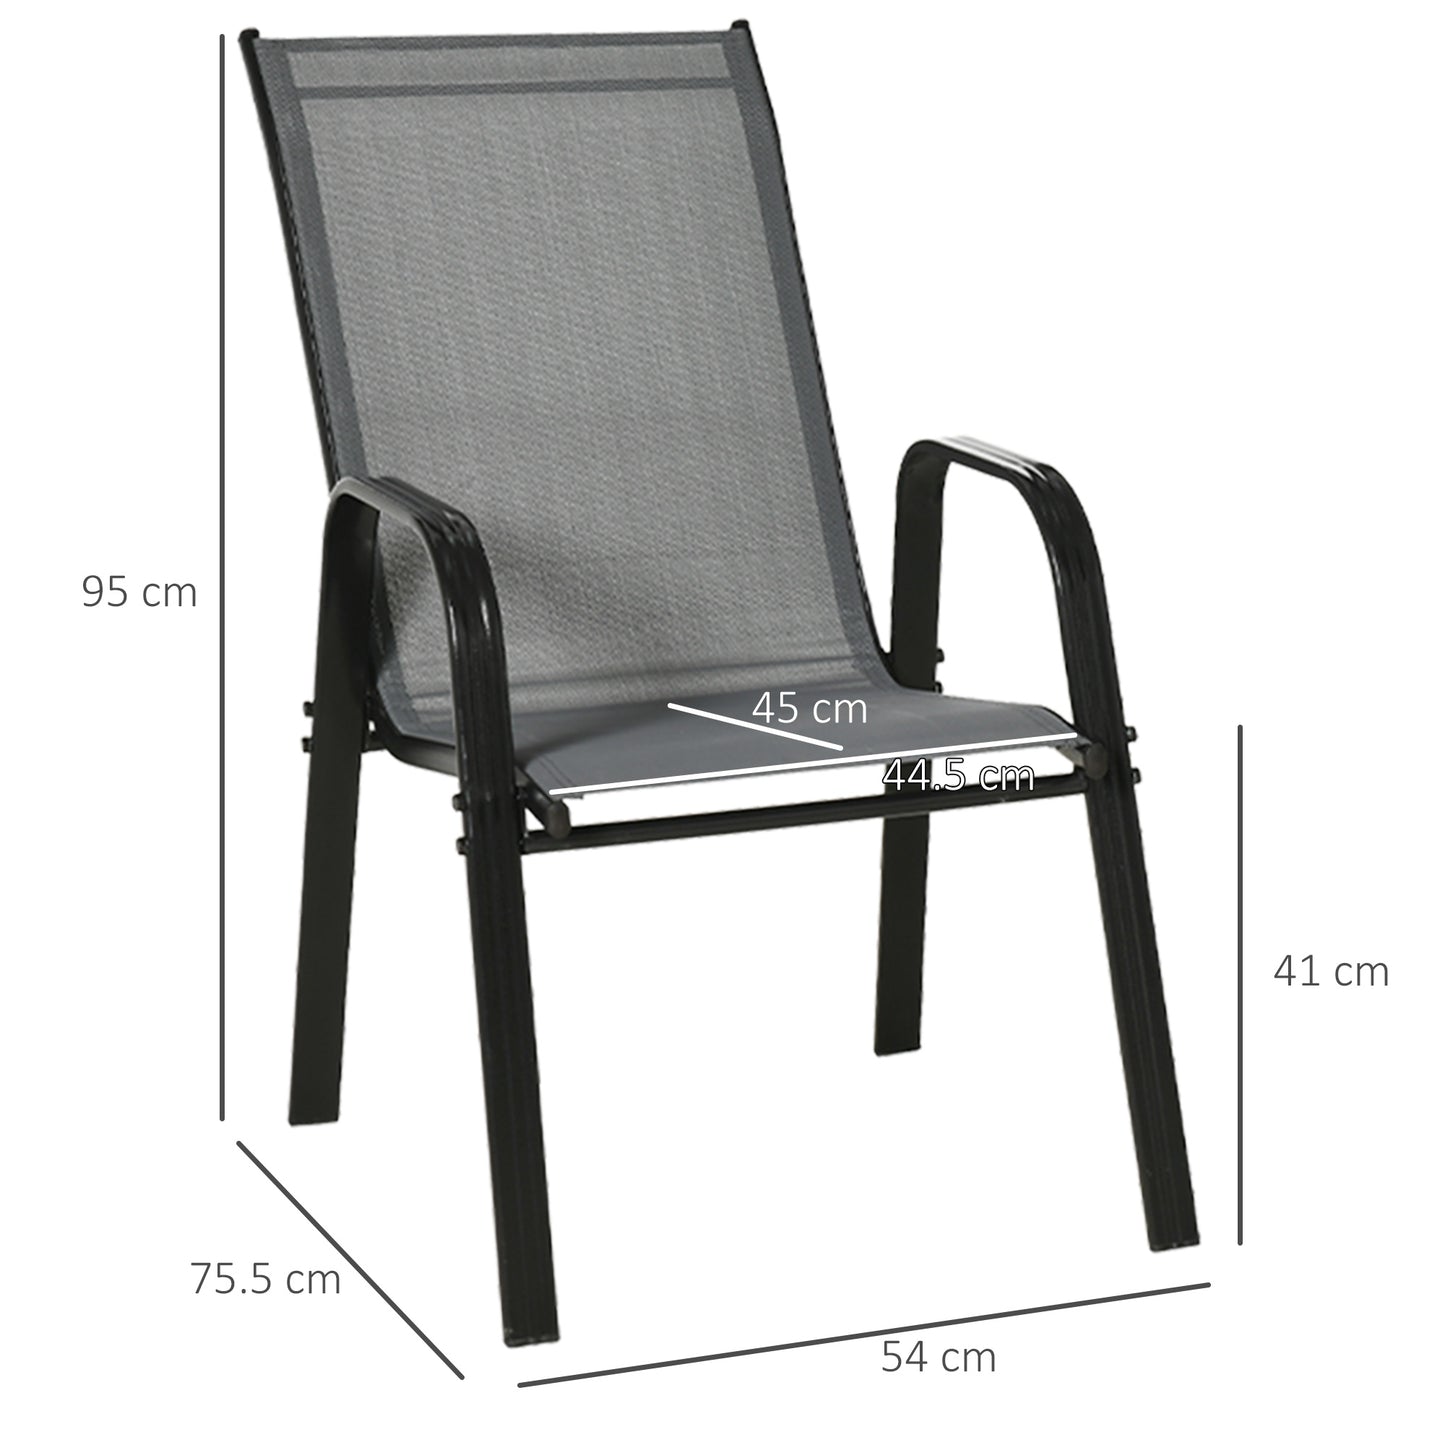 Outsunny Set of 4 Garden Dining Chair Set Stackable Outdoor Patio Furniture Set with Backrest and Armrest, Dark Grey